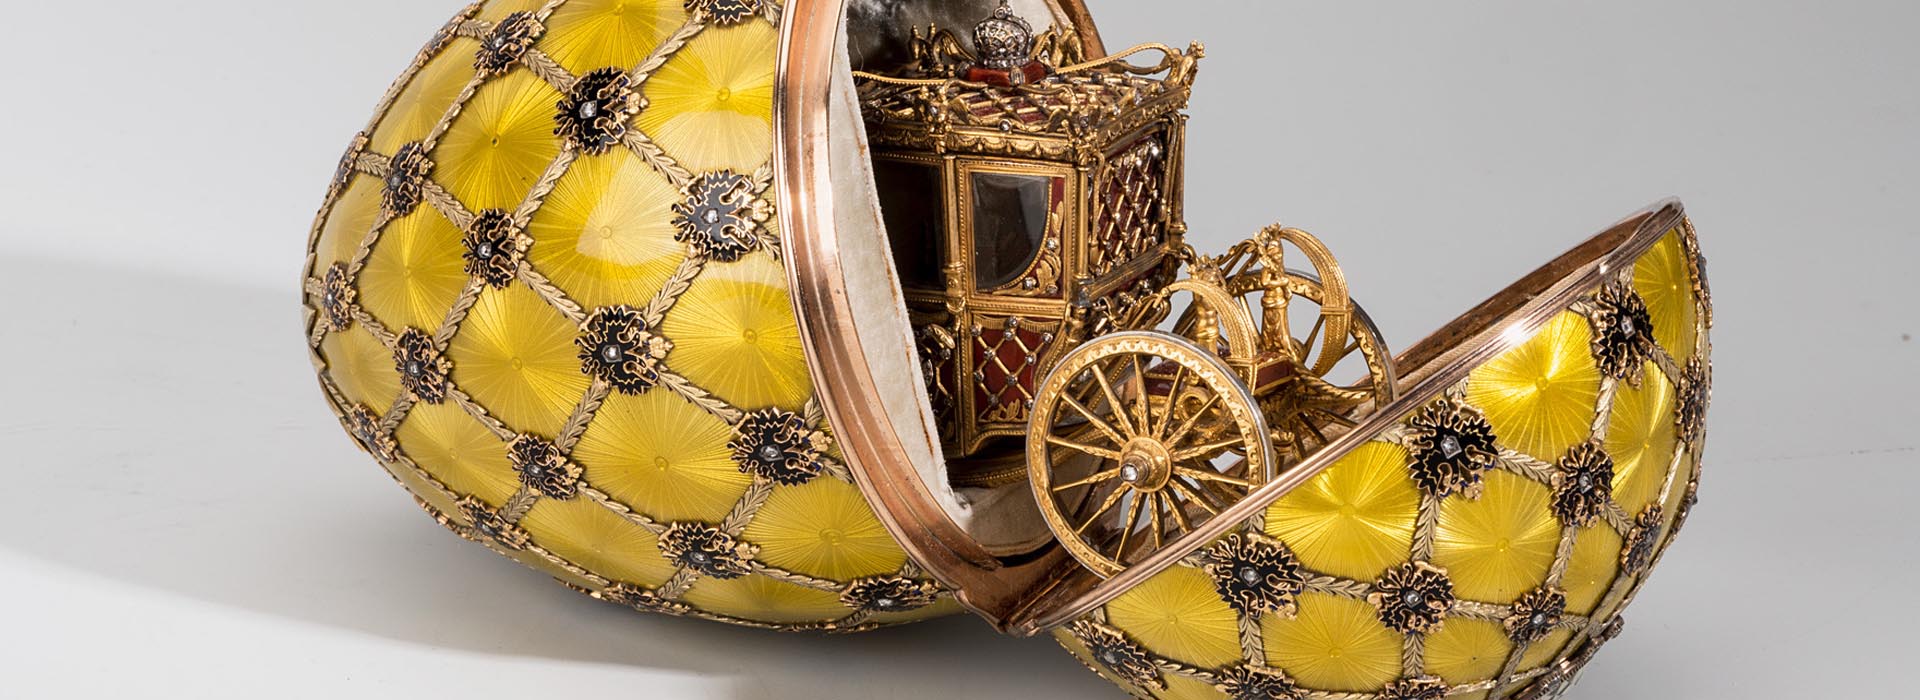 FABERGÉ AT THE VENARIA REALE. THE JEWELRY OF THE LAST CZARS